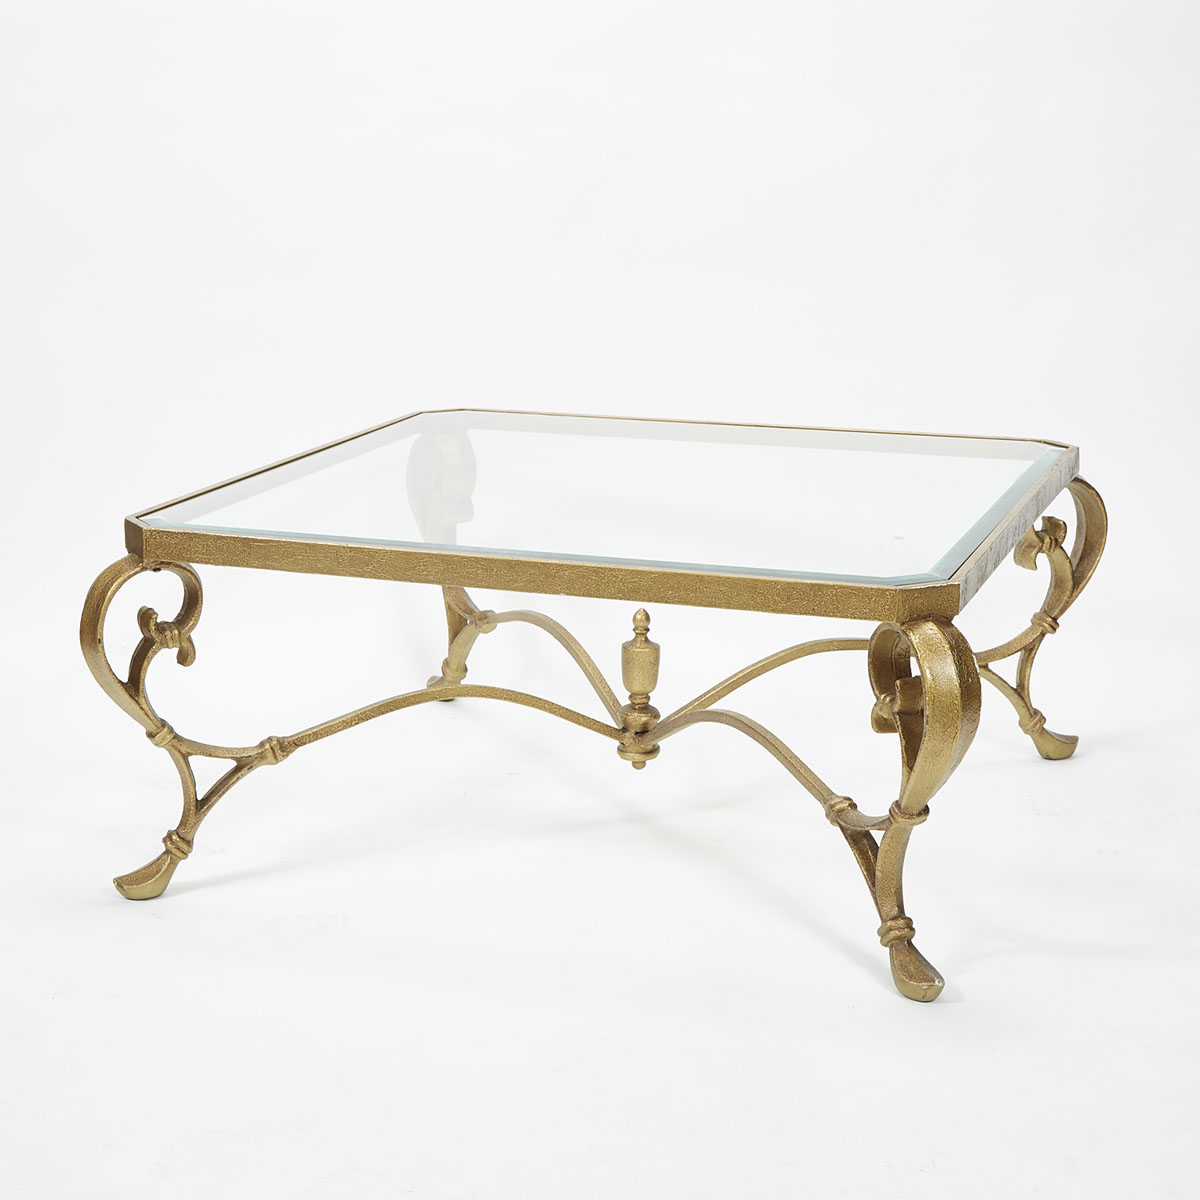 Large Gilt Metal and Glass Coffee Table, 20th century